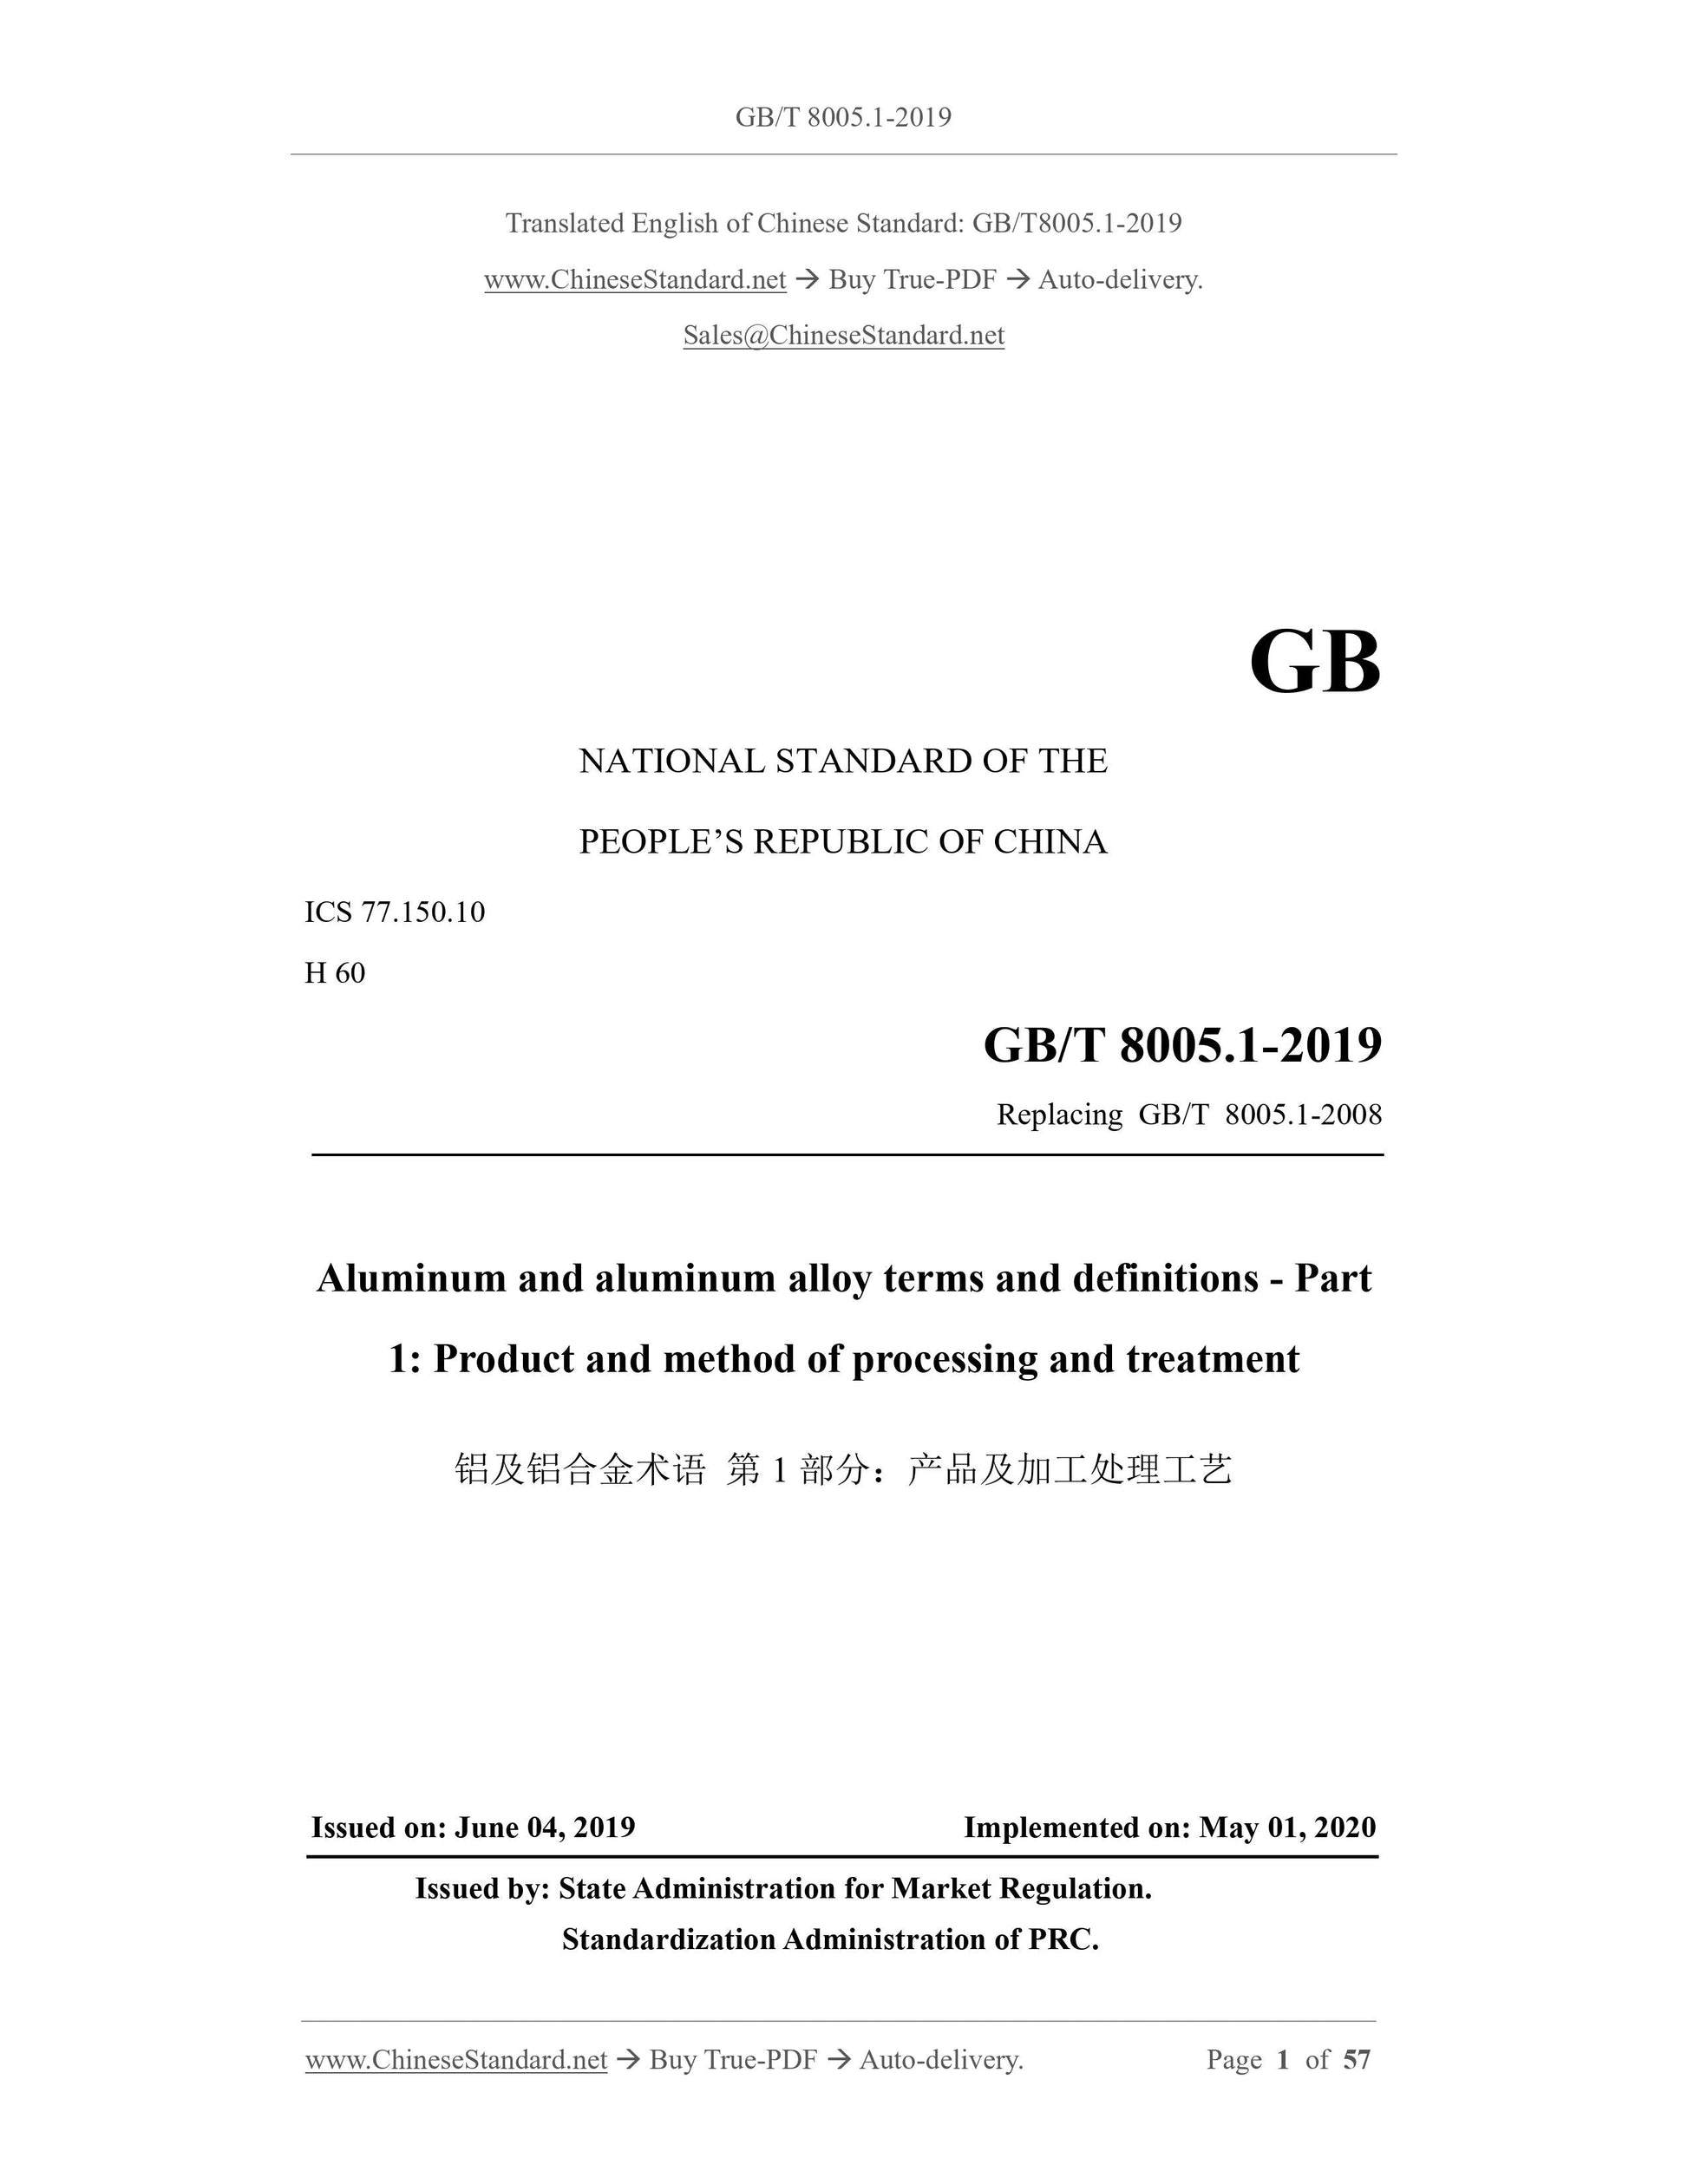 GB/T 8005.1-2019 Page 1